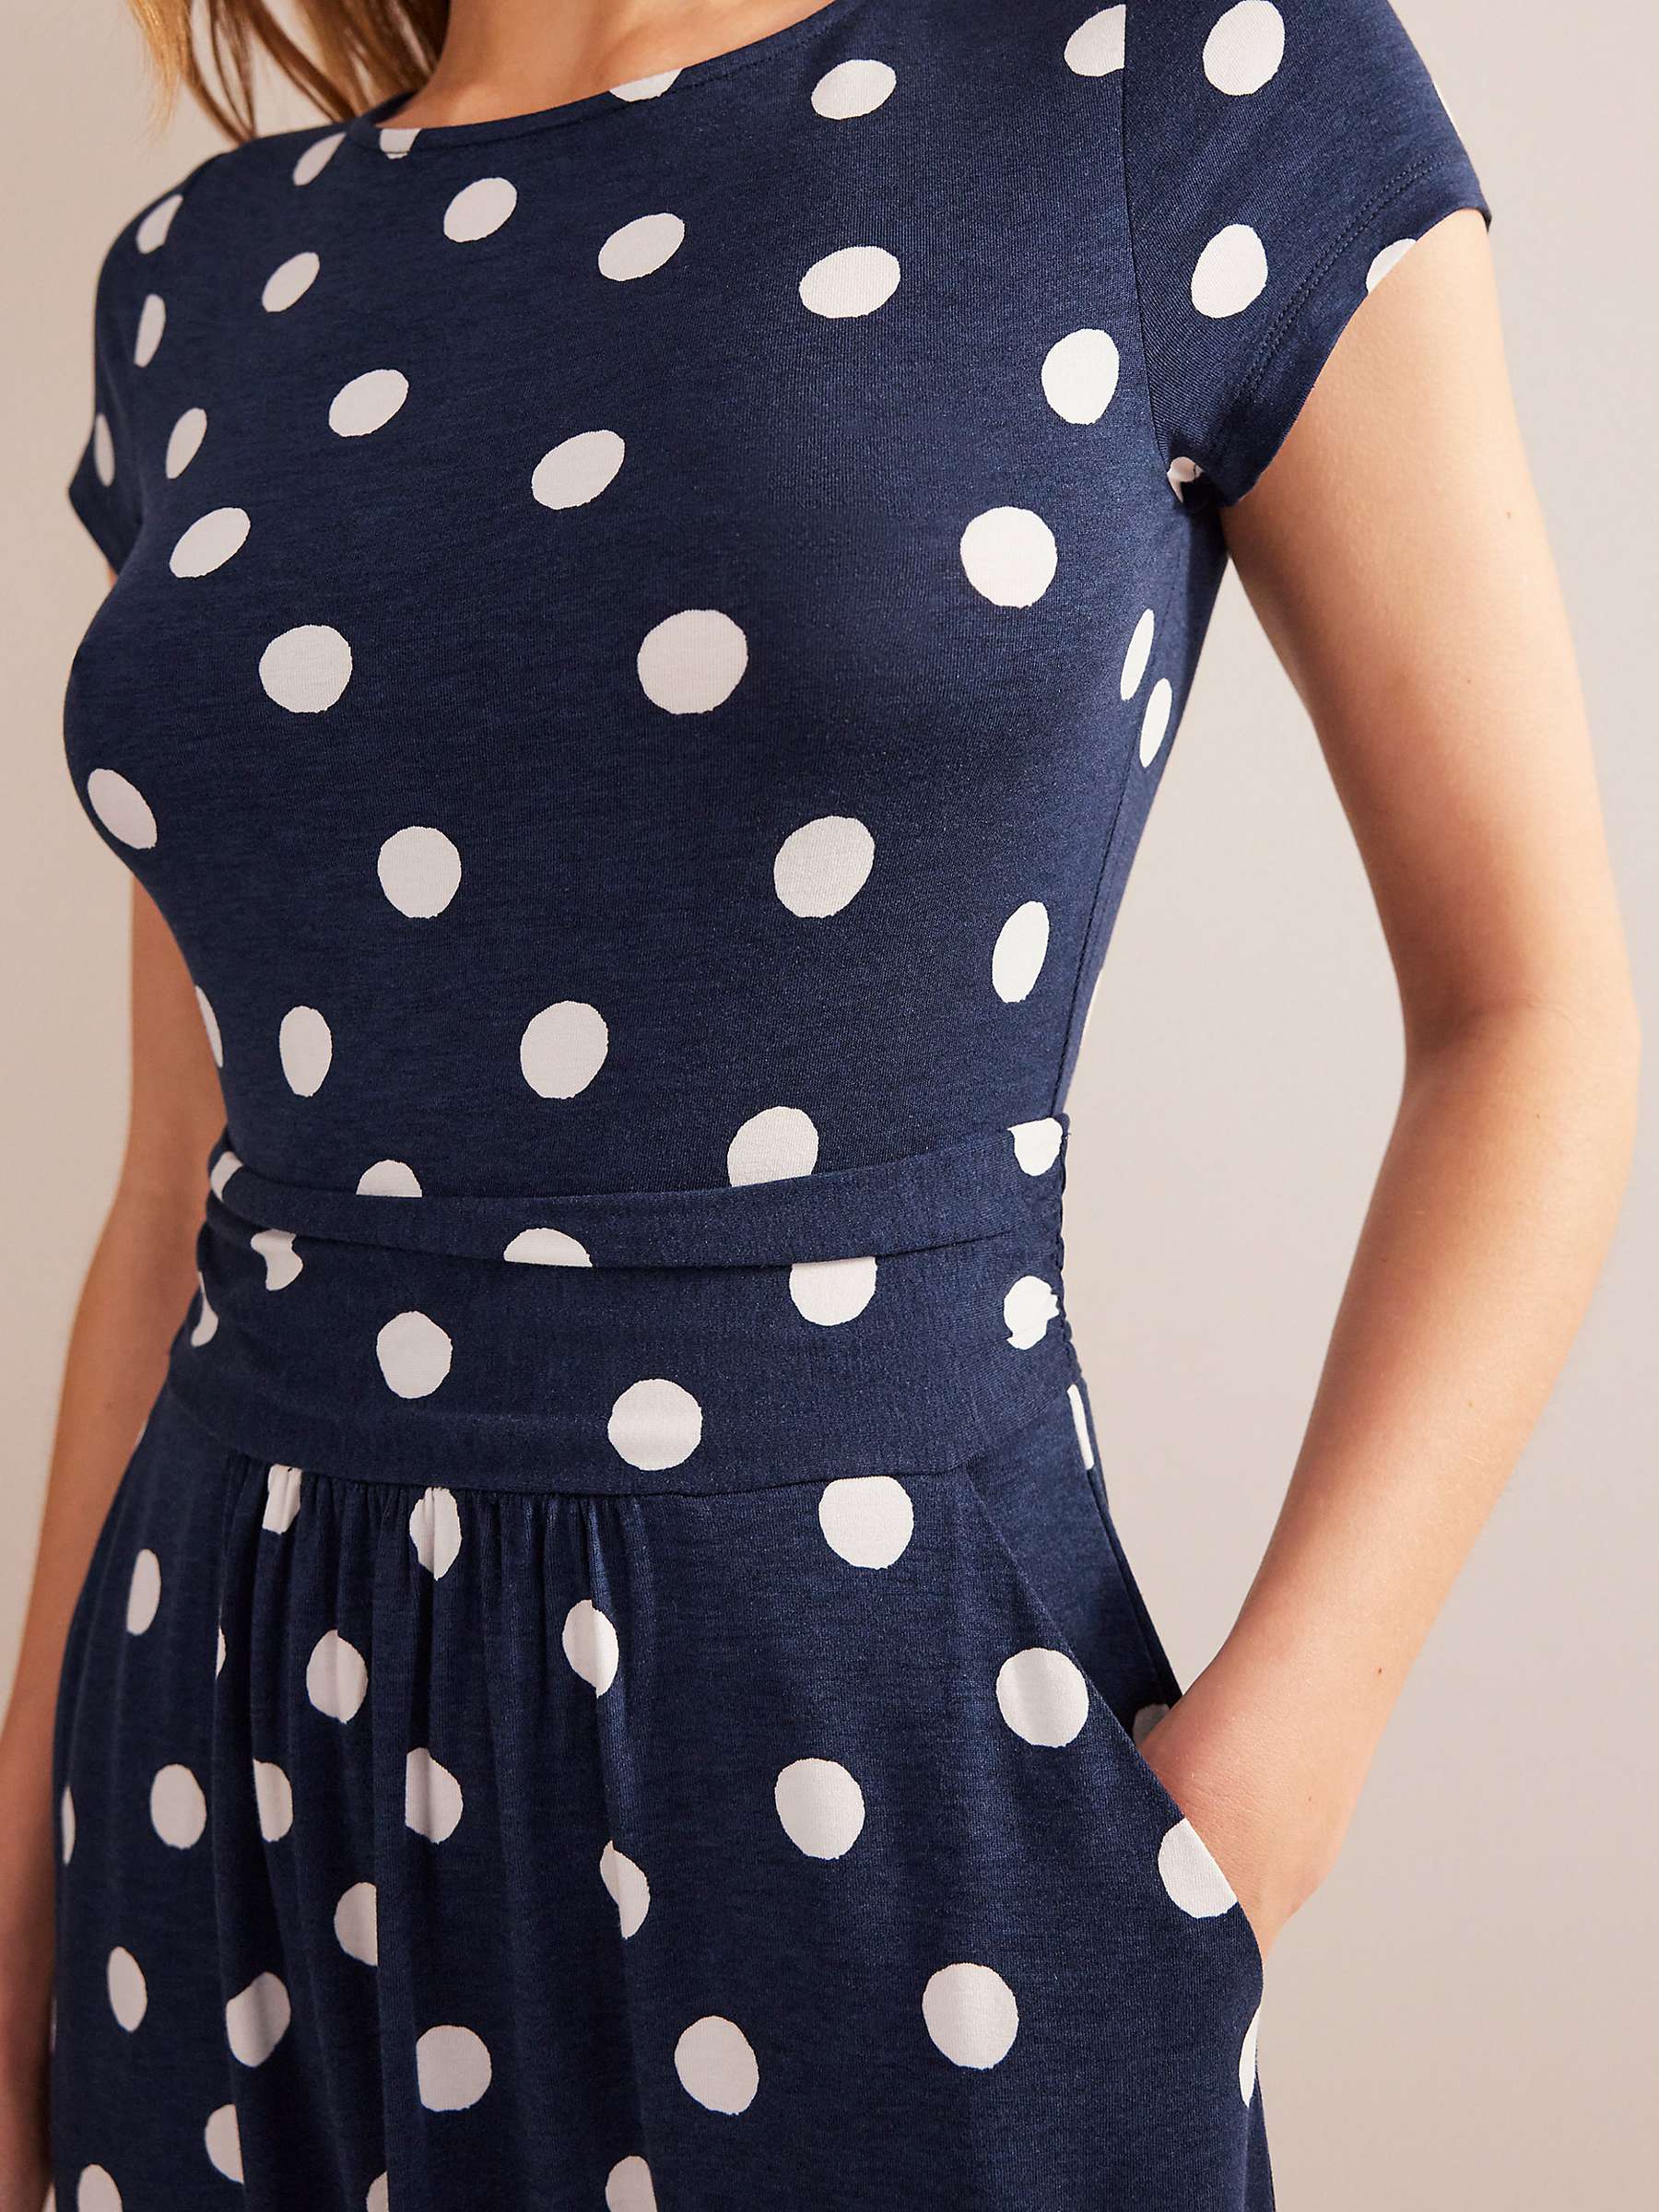 Buy Boden Amelie Jersey Painterly Spot Dress, Navy/White Online at johnlewis.com